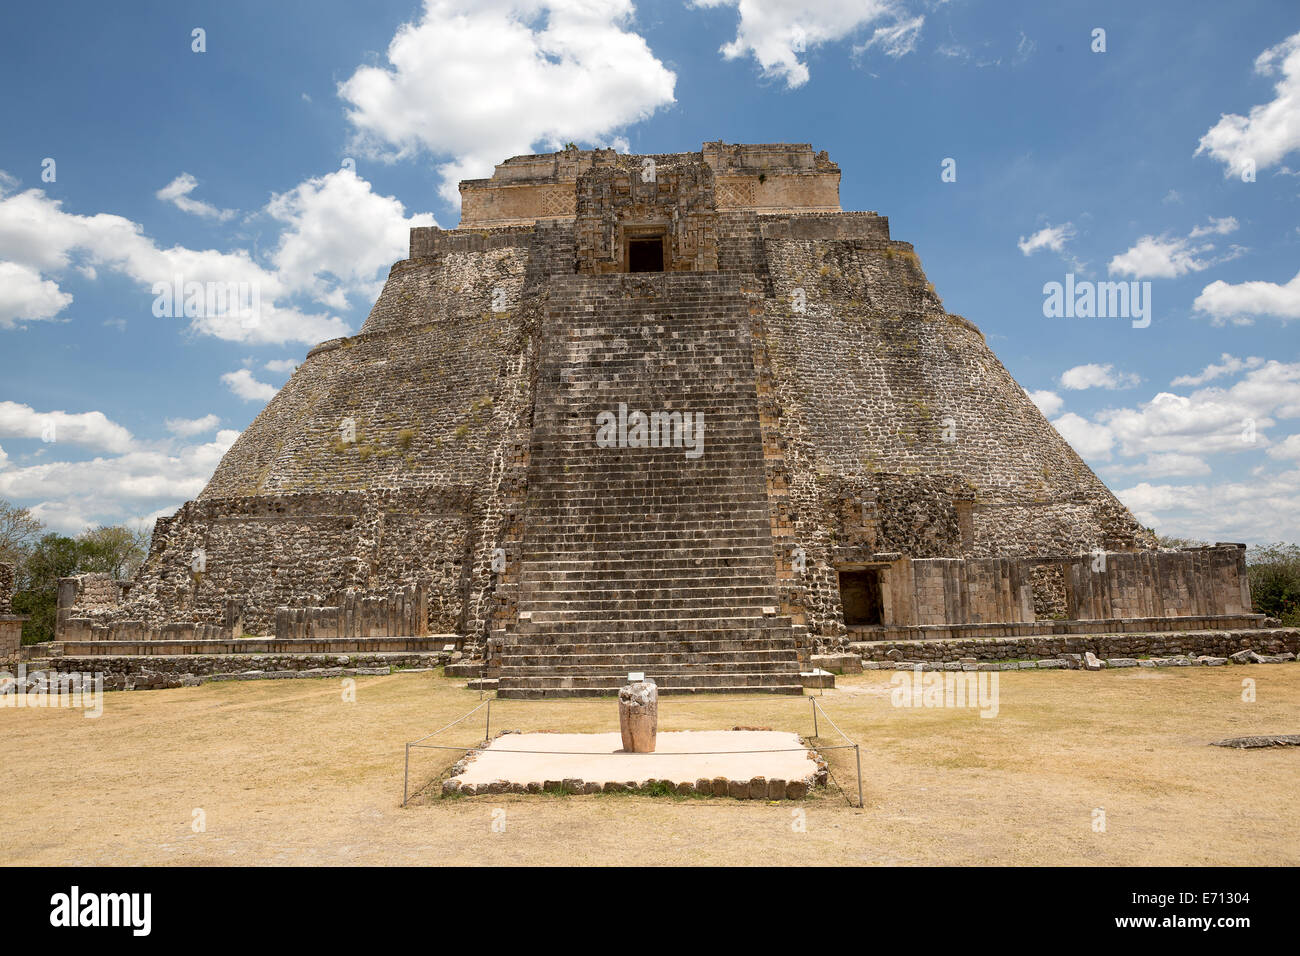 the main temple of the ancient city of Uxmal Mexico Stock Photo